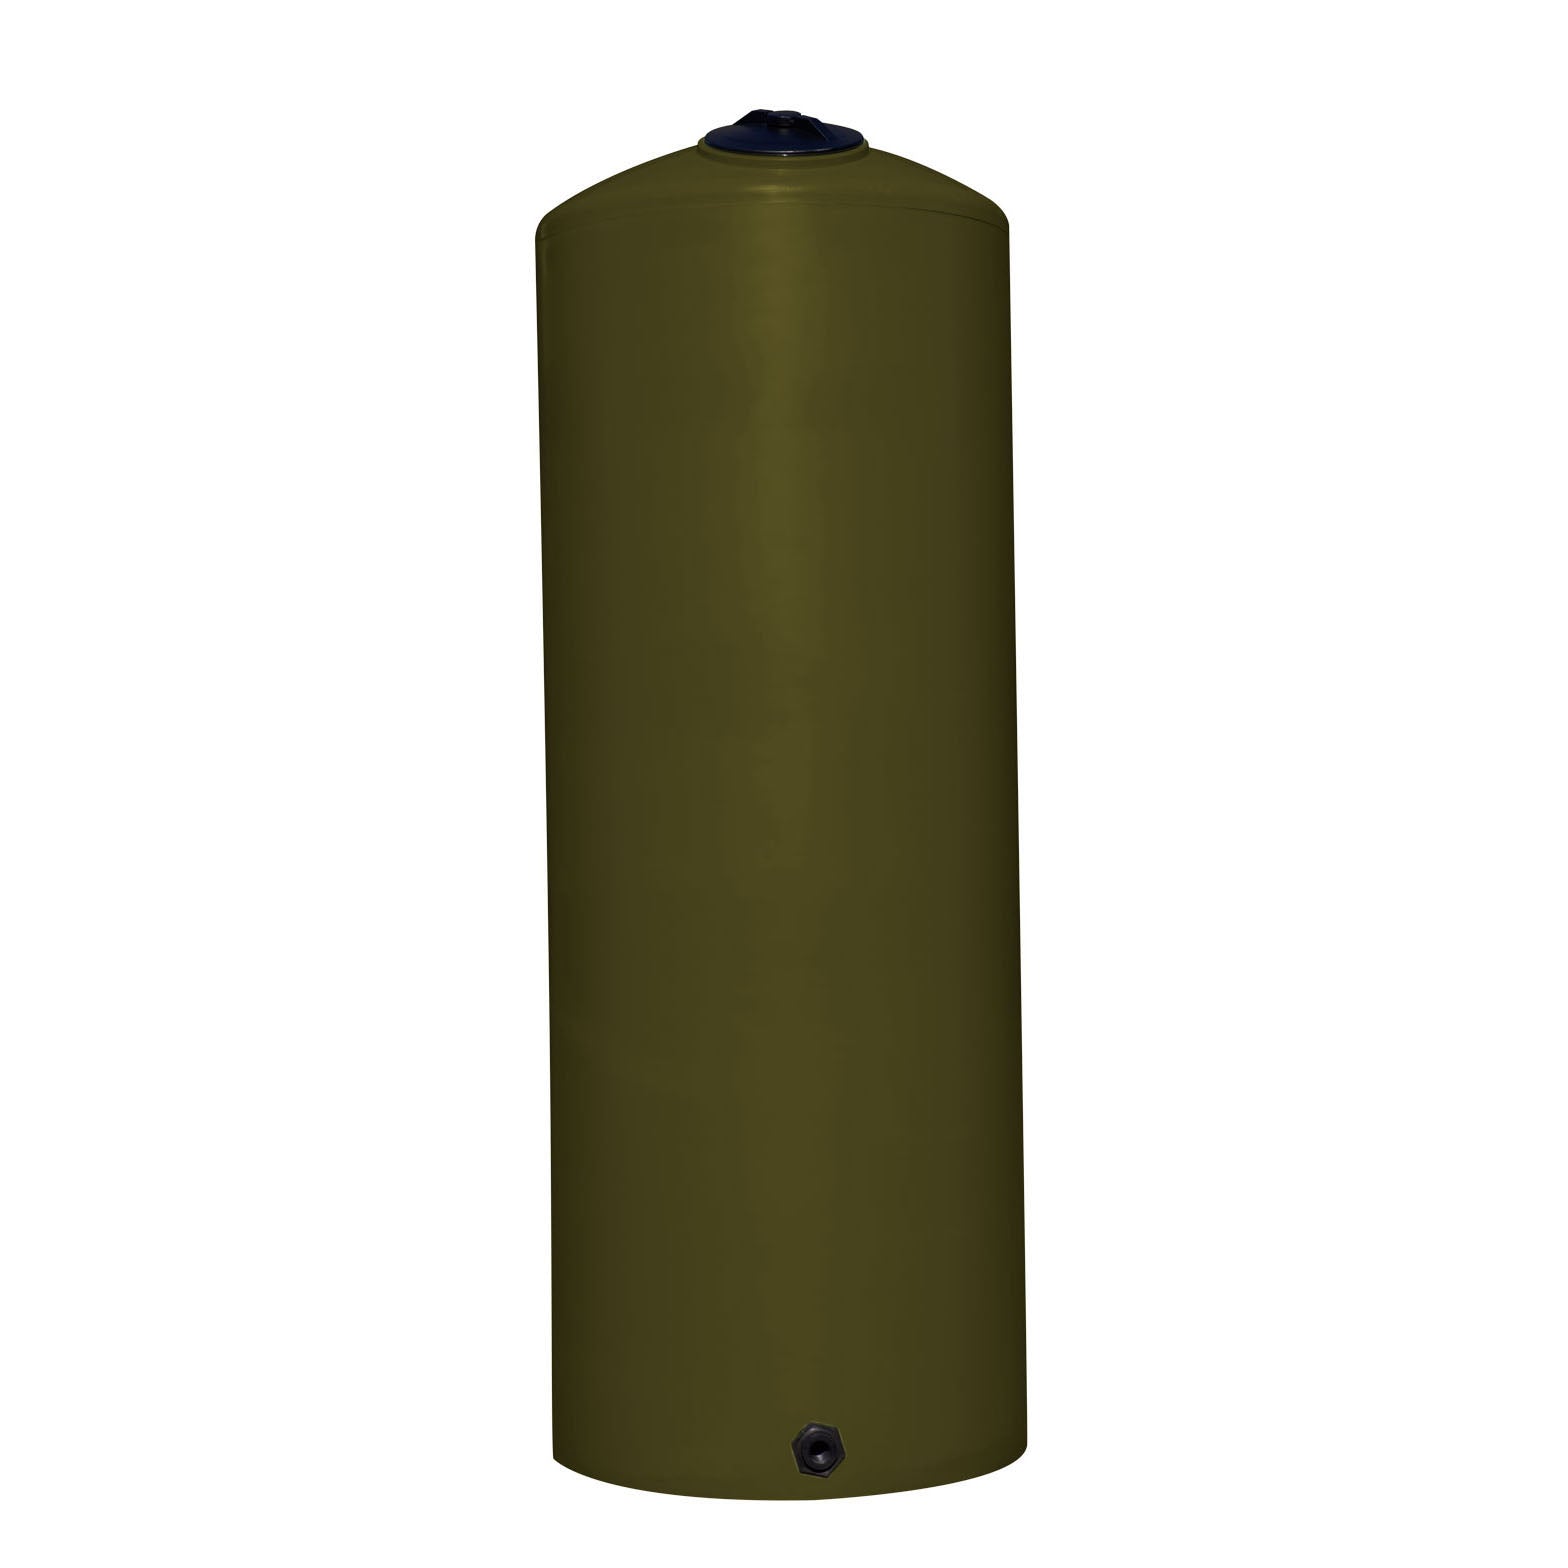 1000L bronze olive Bailey water tank